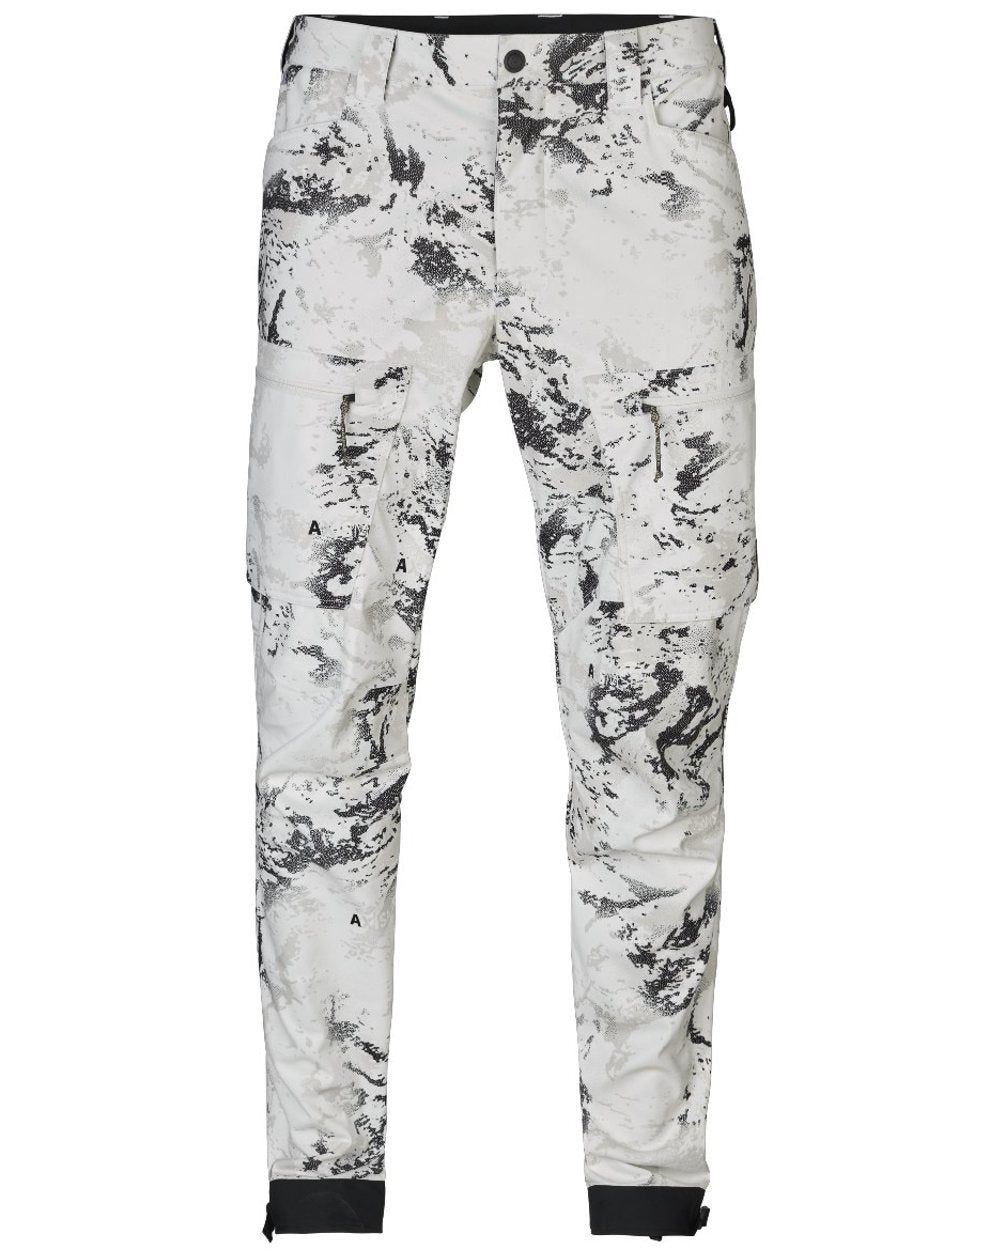 Axis Snow colour Harkila Winter Active WSP Trousers on white background 